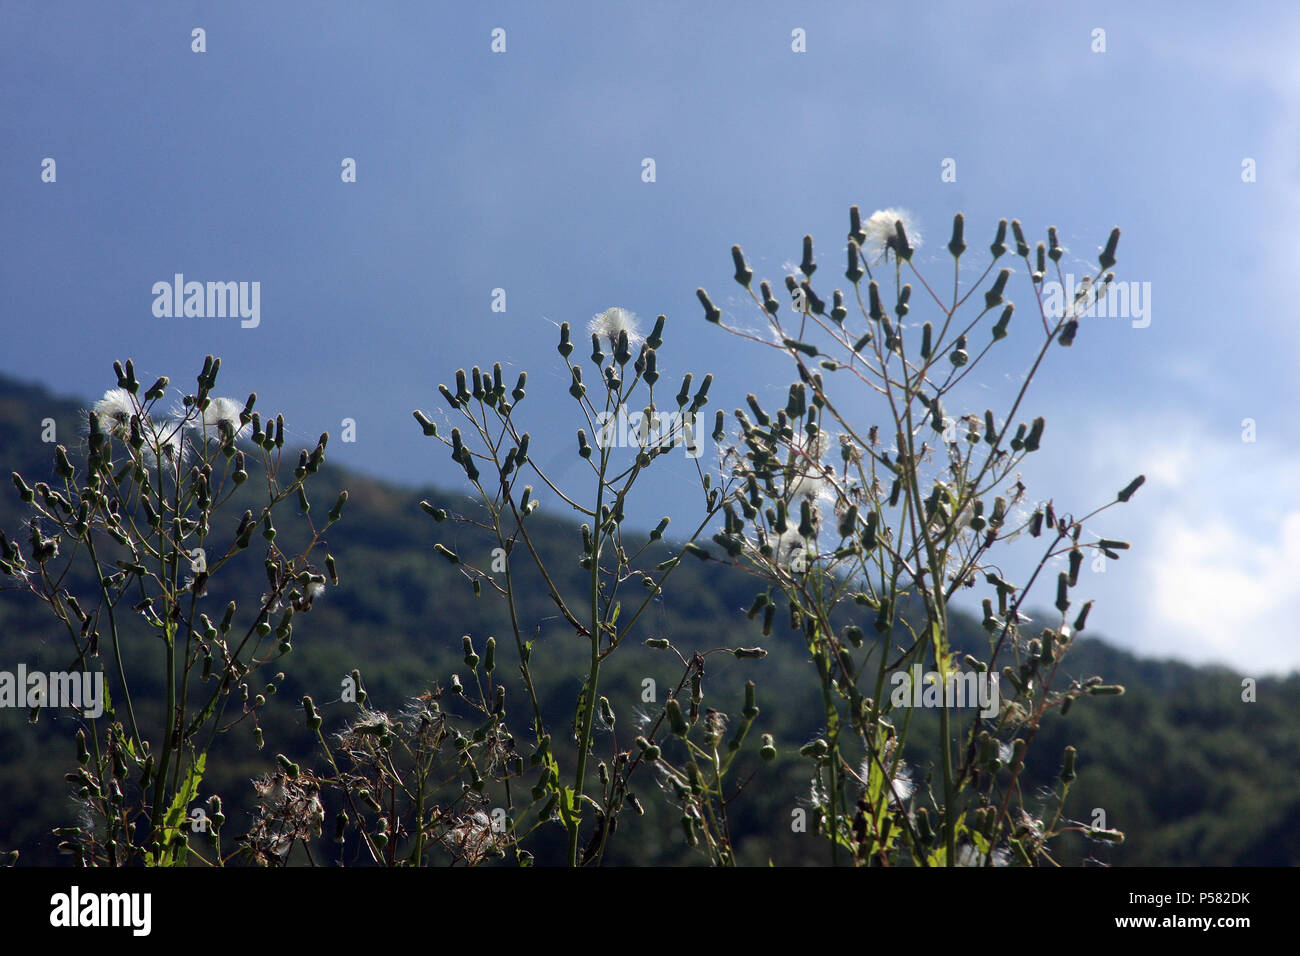 Groundsel's seeds being dispersed by the wind. Stock Photo